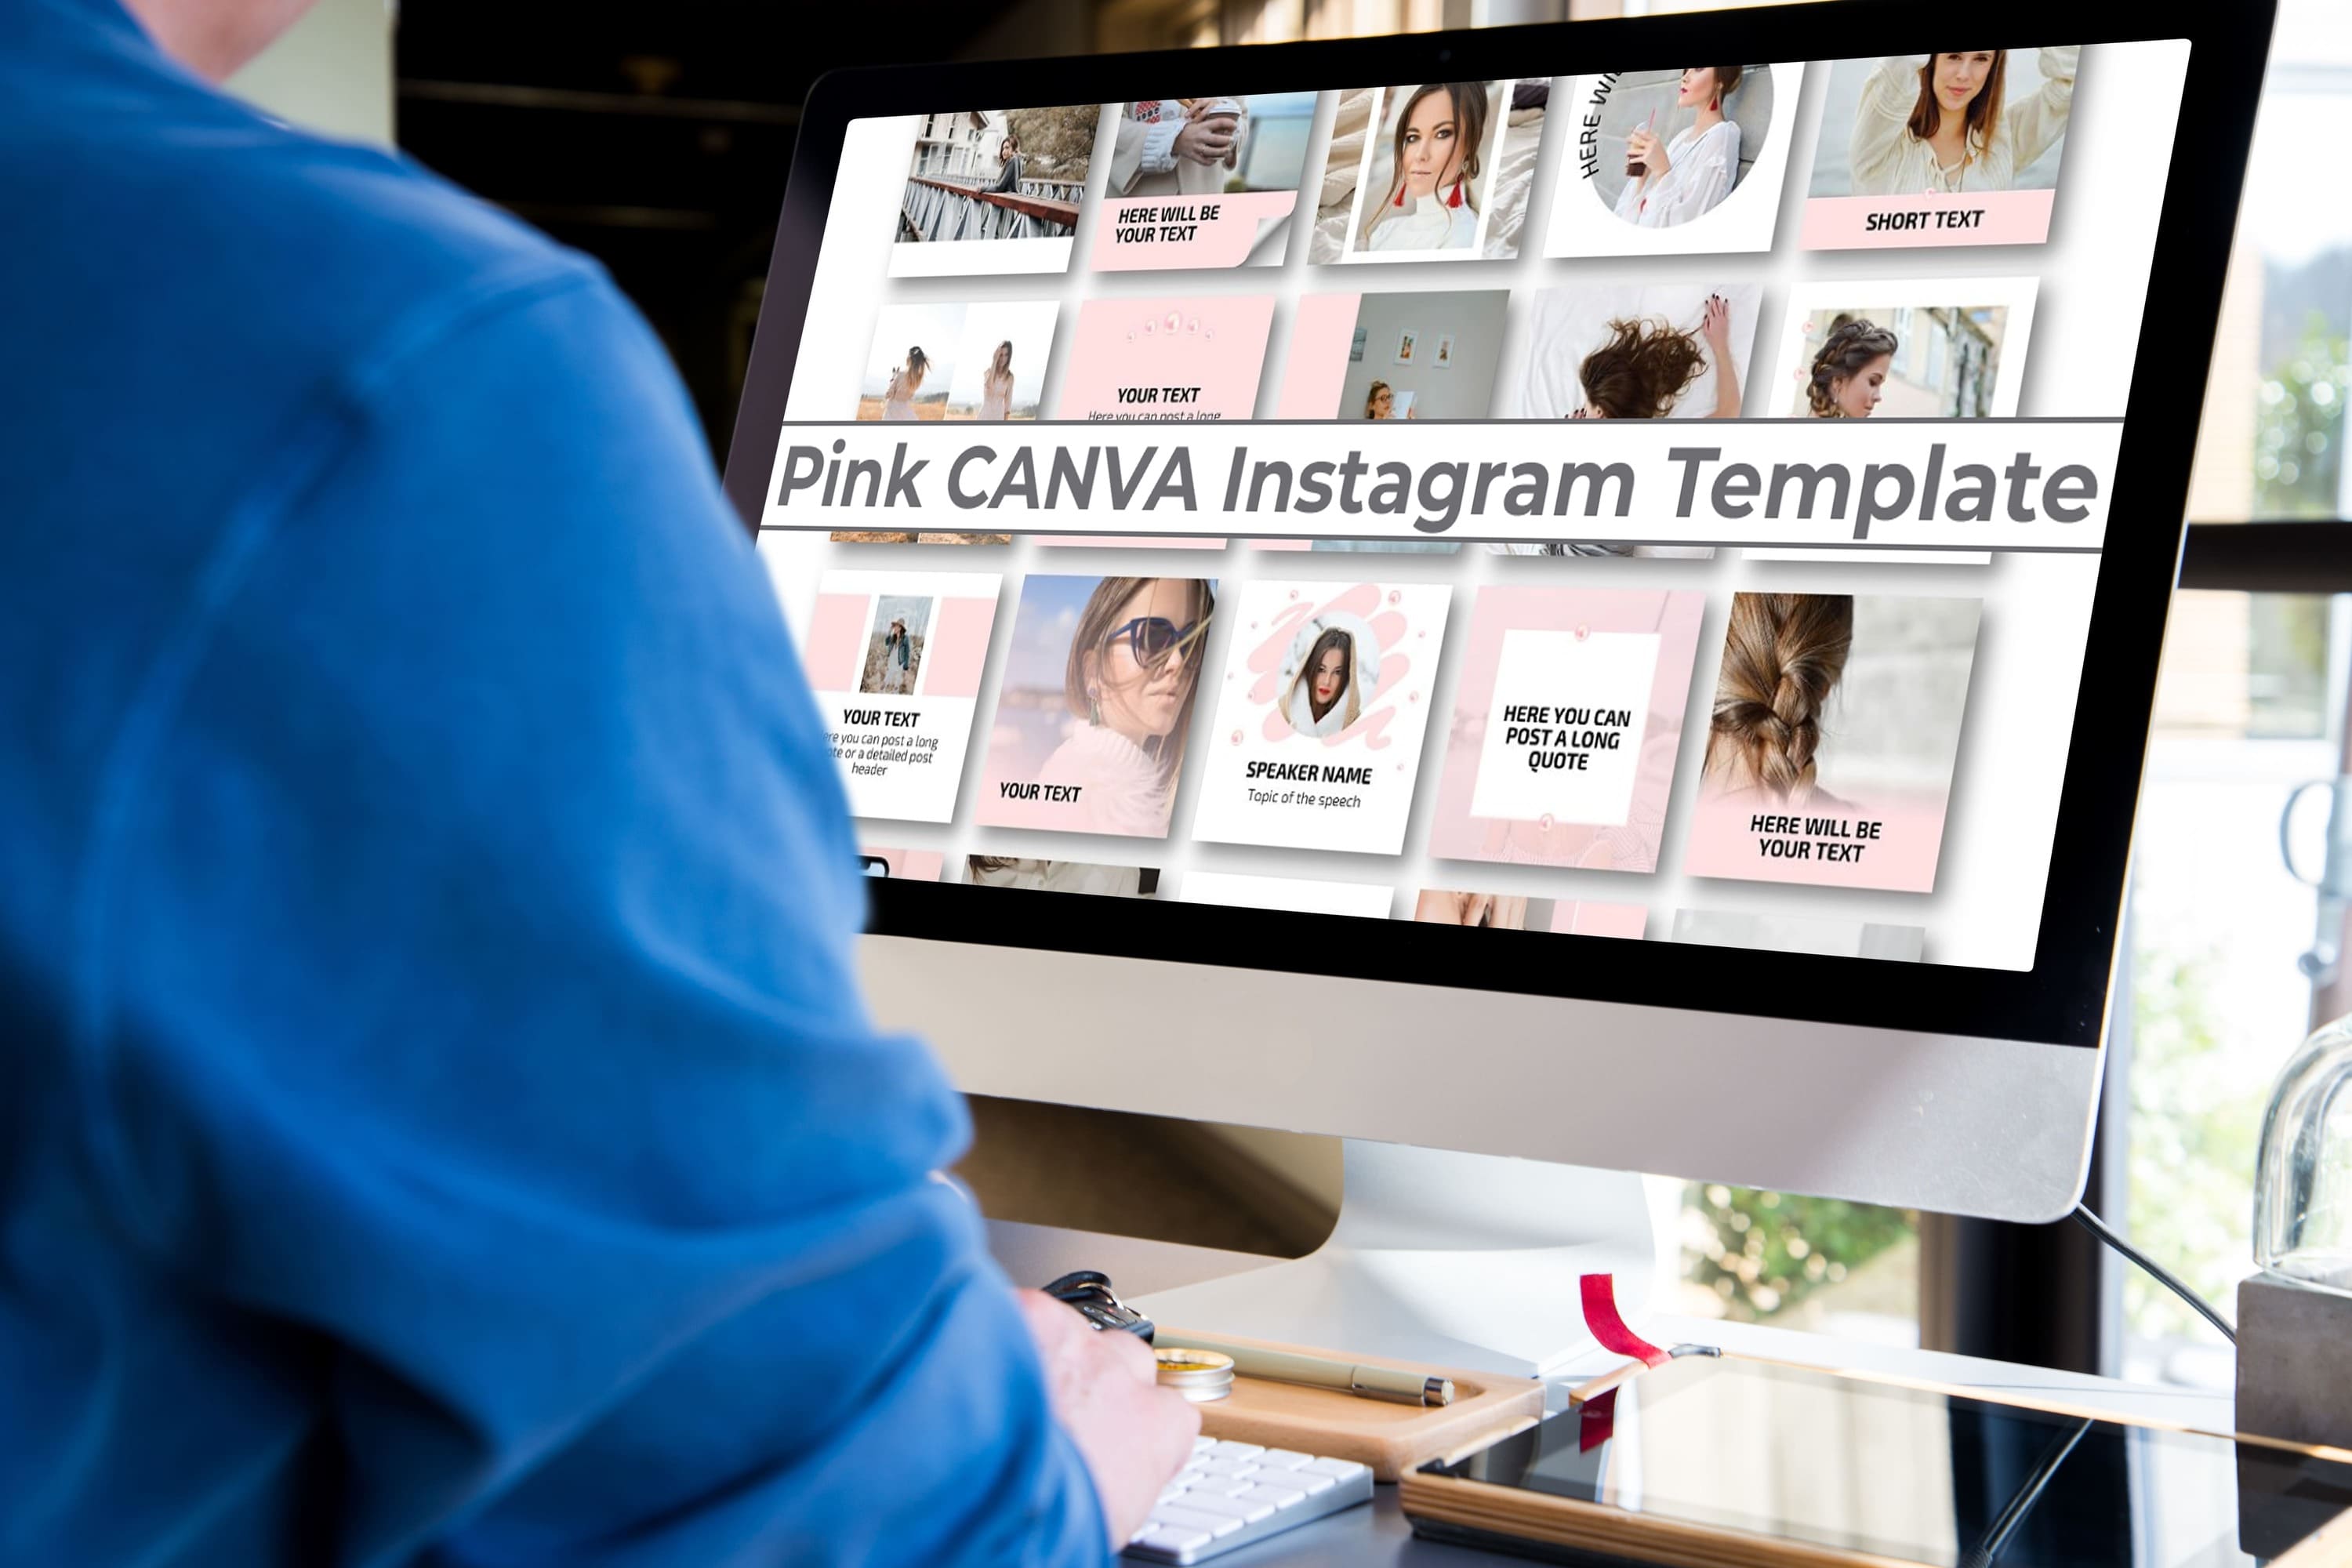 Pink CANVA Instagram Template In IMac.